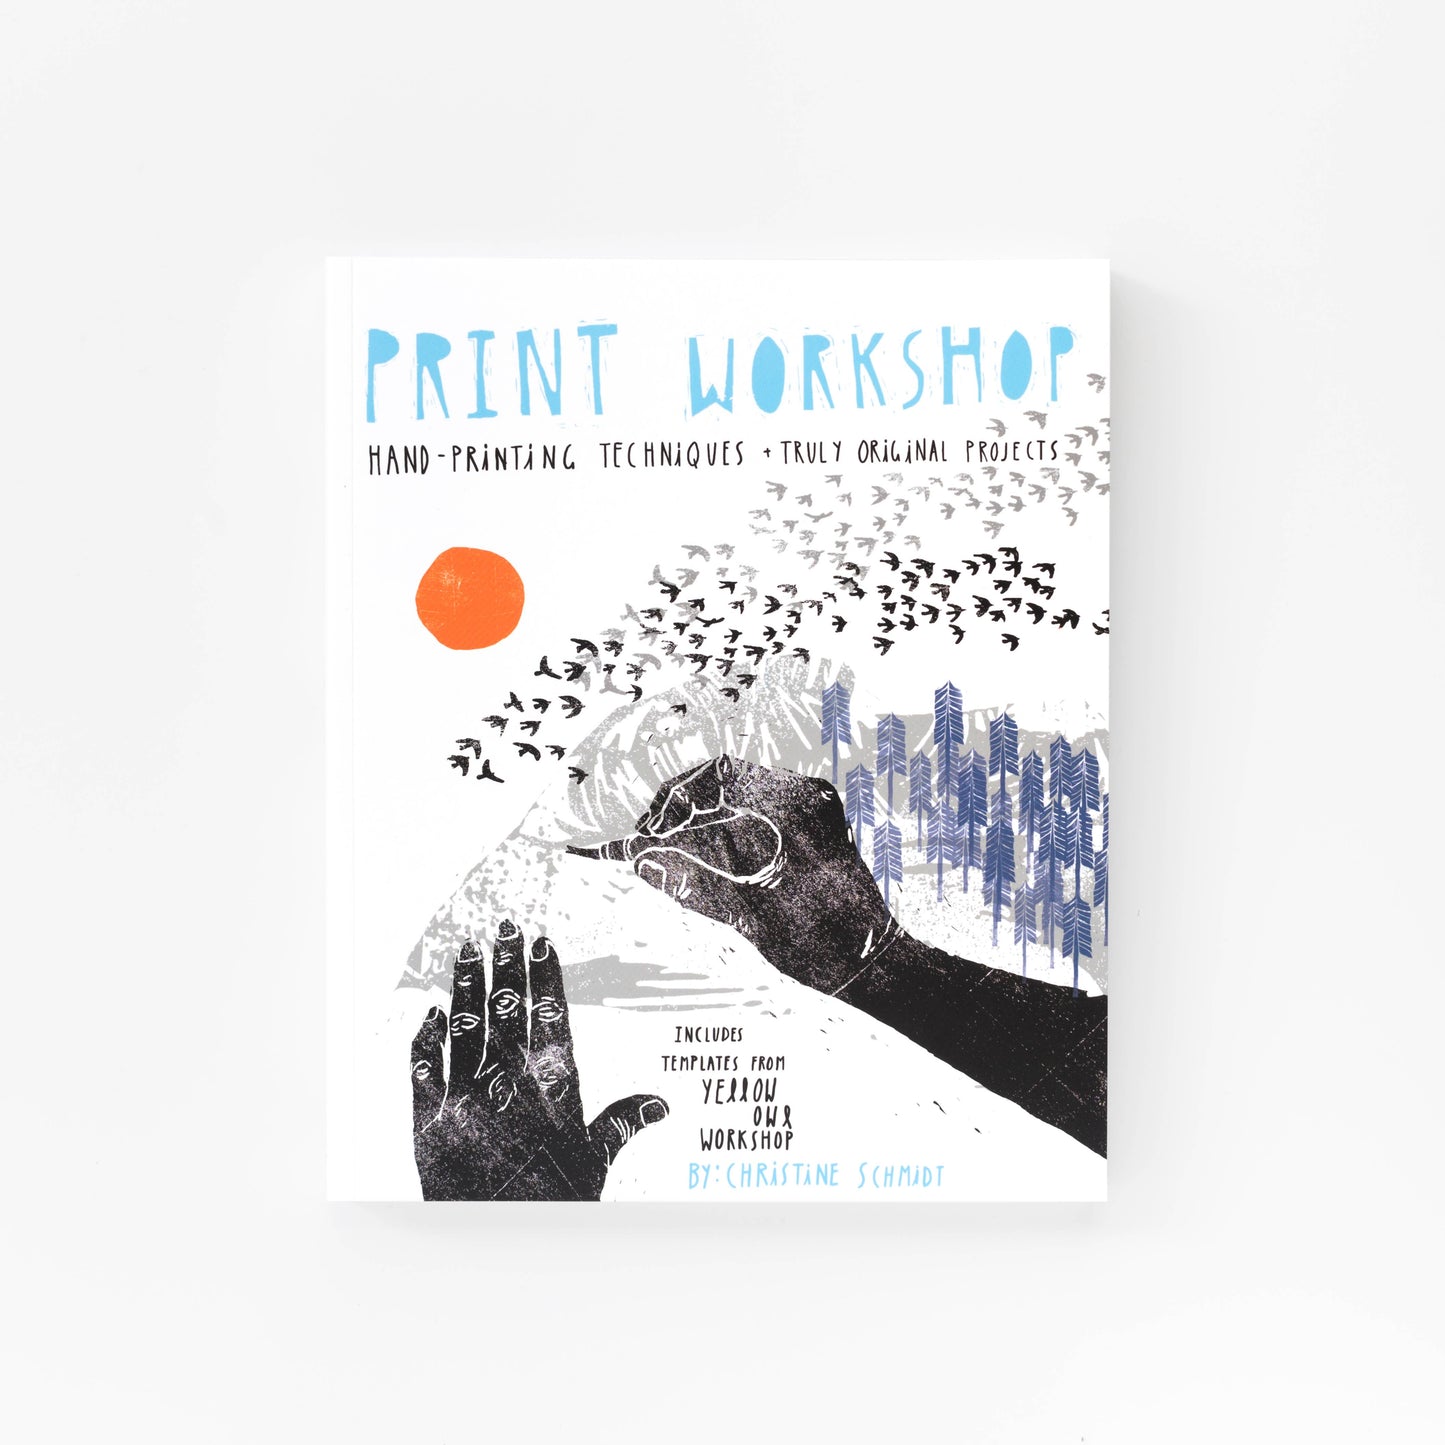 PRINT WORKSHOP: HAND-PRINTING TECHNIQUES AND TRULY ORIGINAL PROJECTS